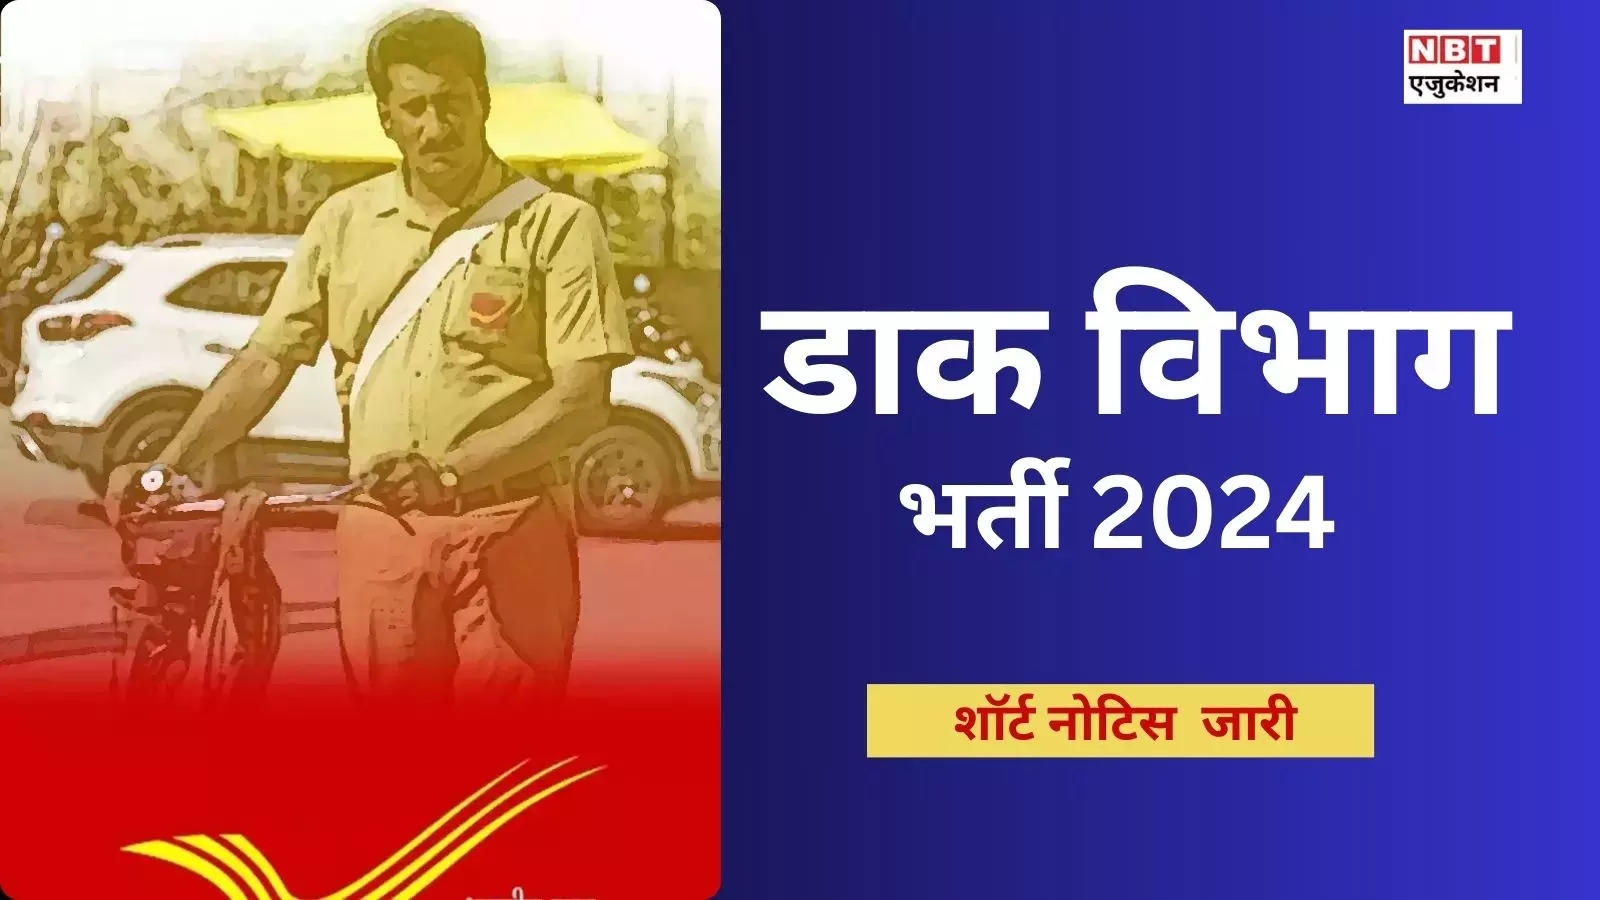 Post Office GDS Vacancy 2024: Short notice issued for 35,000 recruitment in Postal Department, applications will start from this day